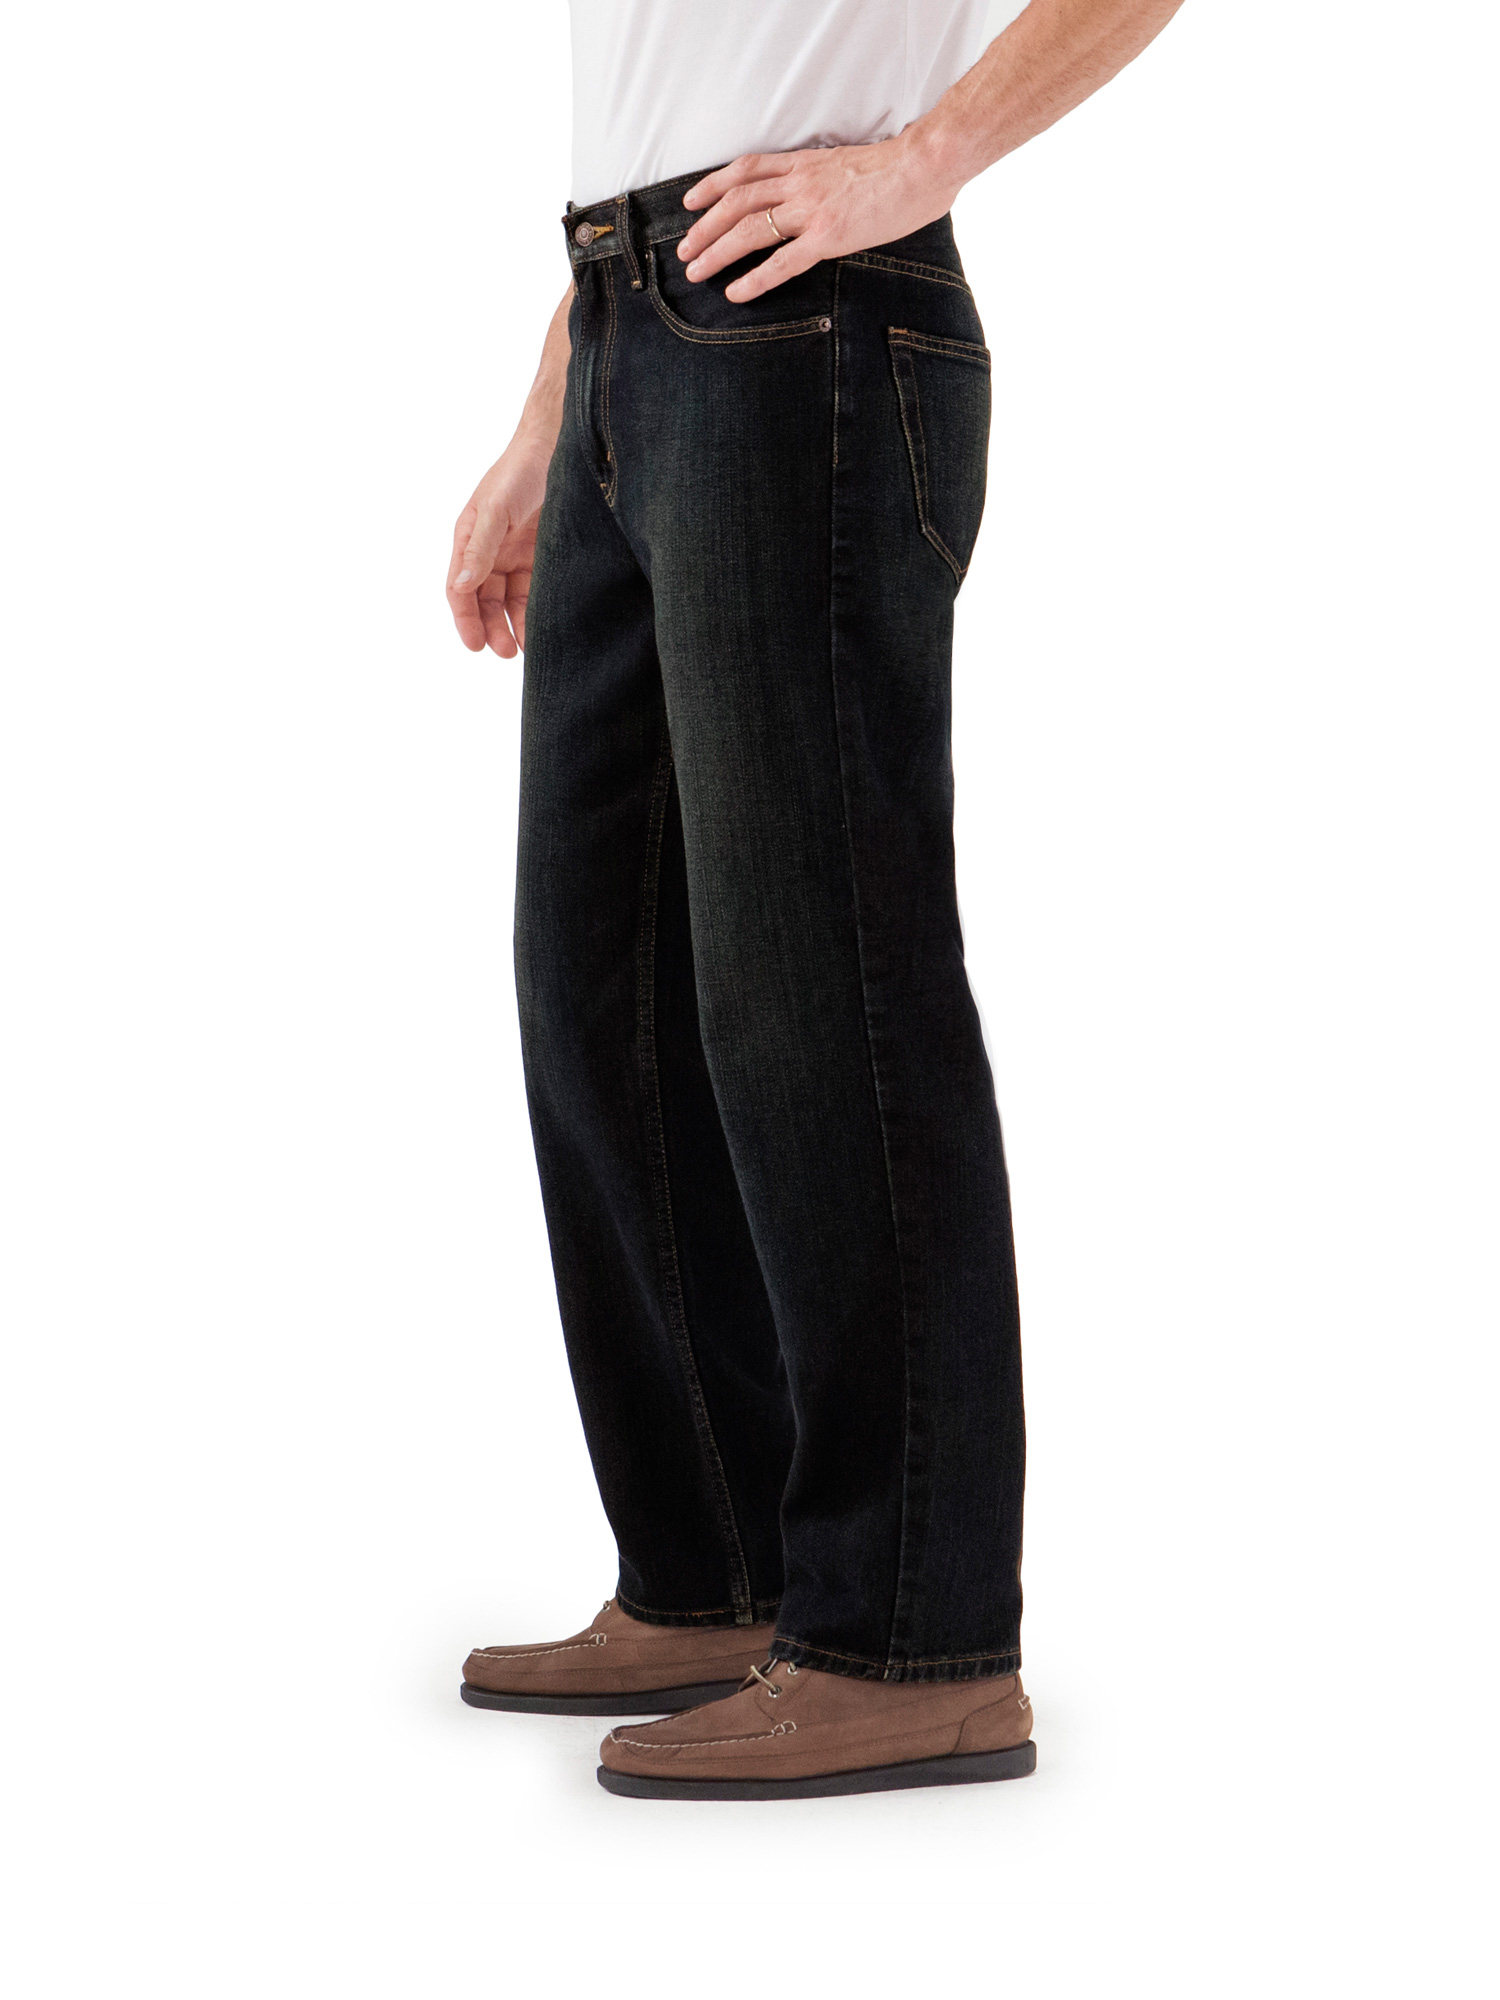 Men's Relaxed Fit Jeans - image 2 of 4